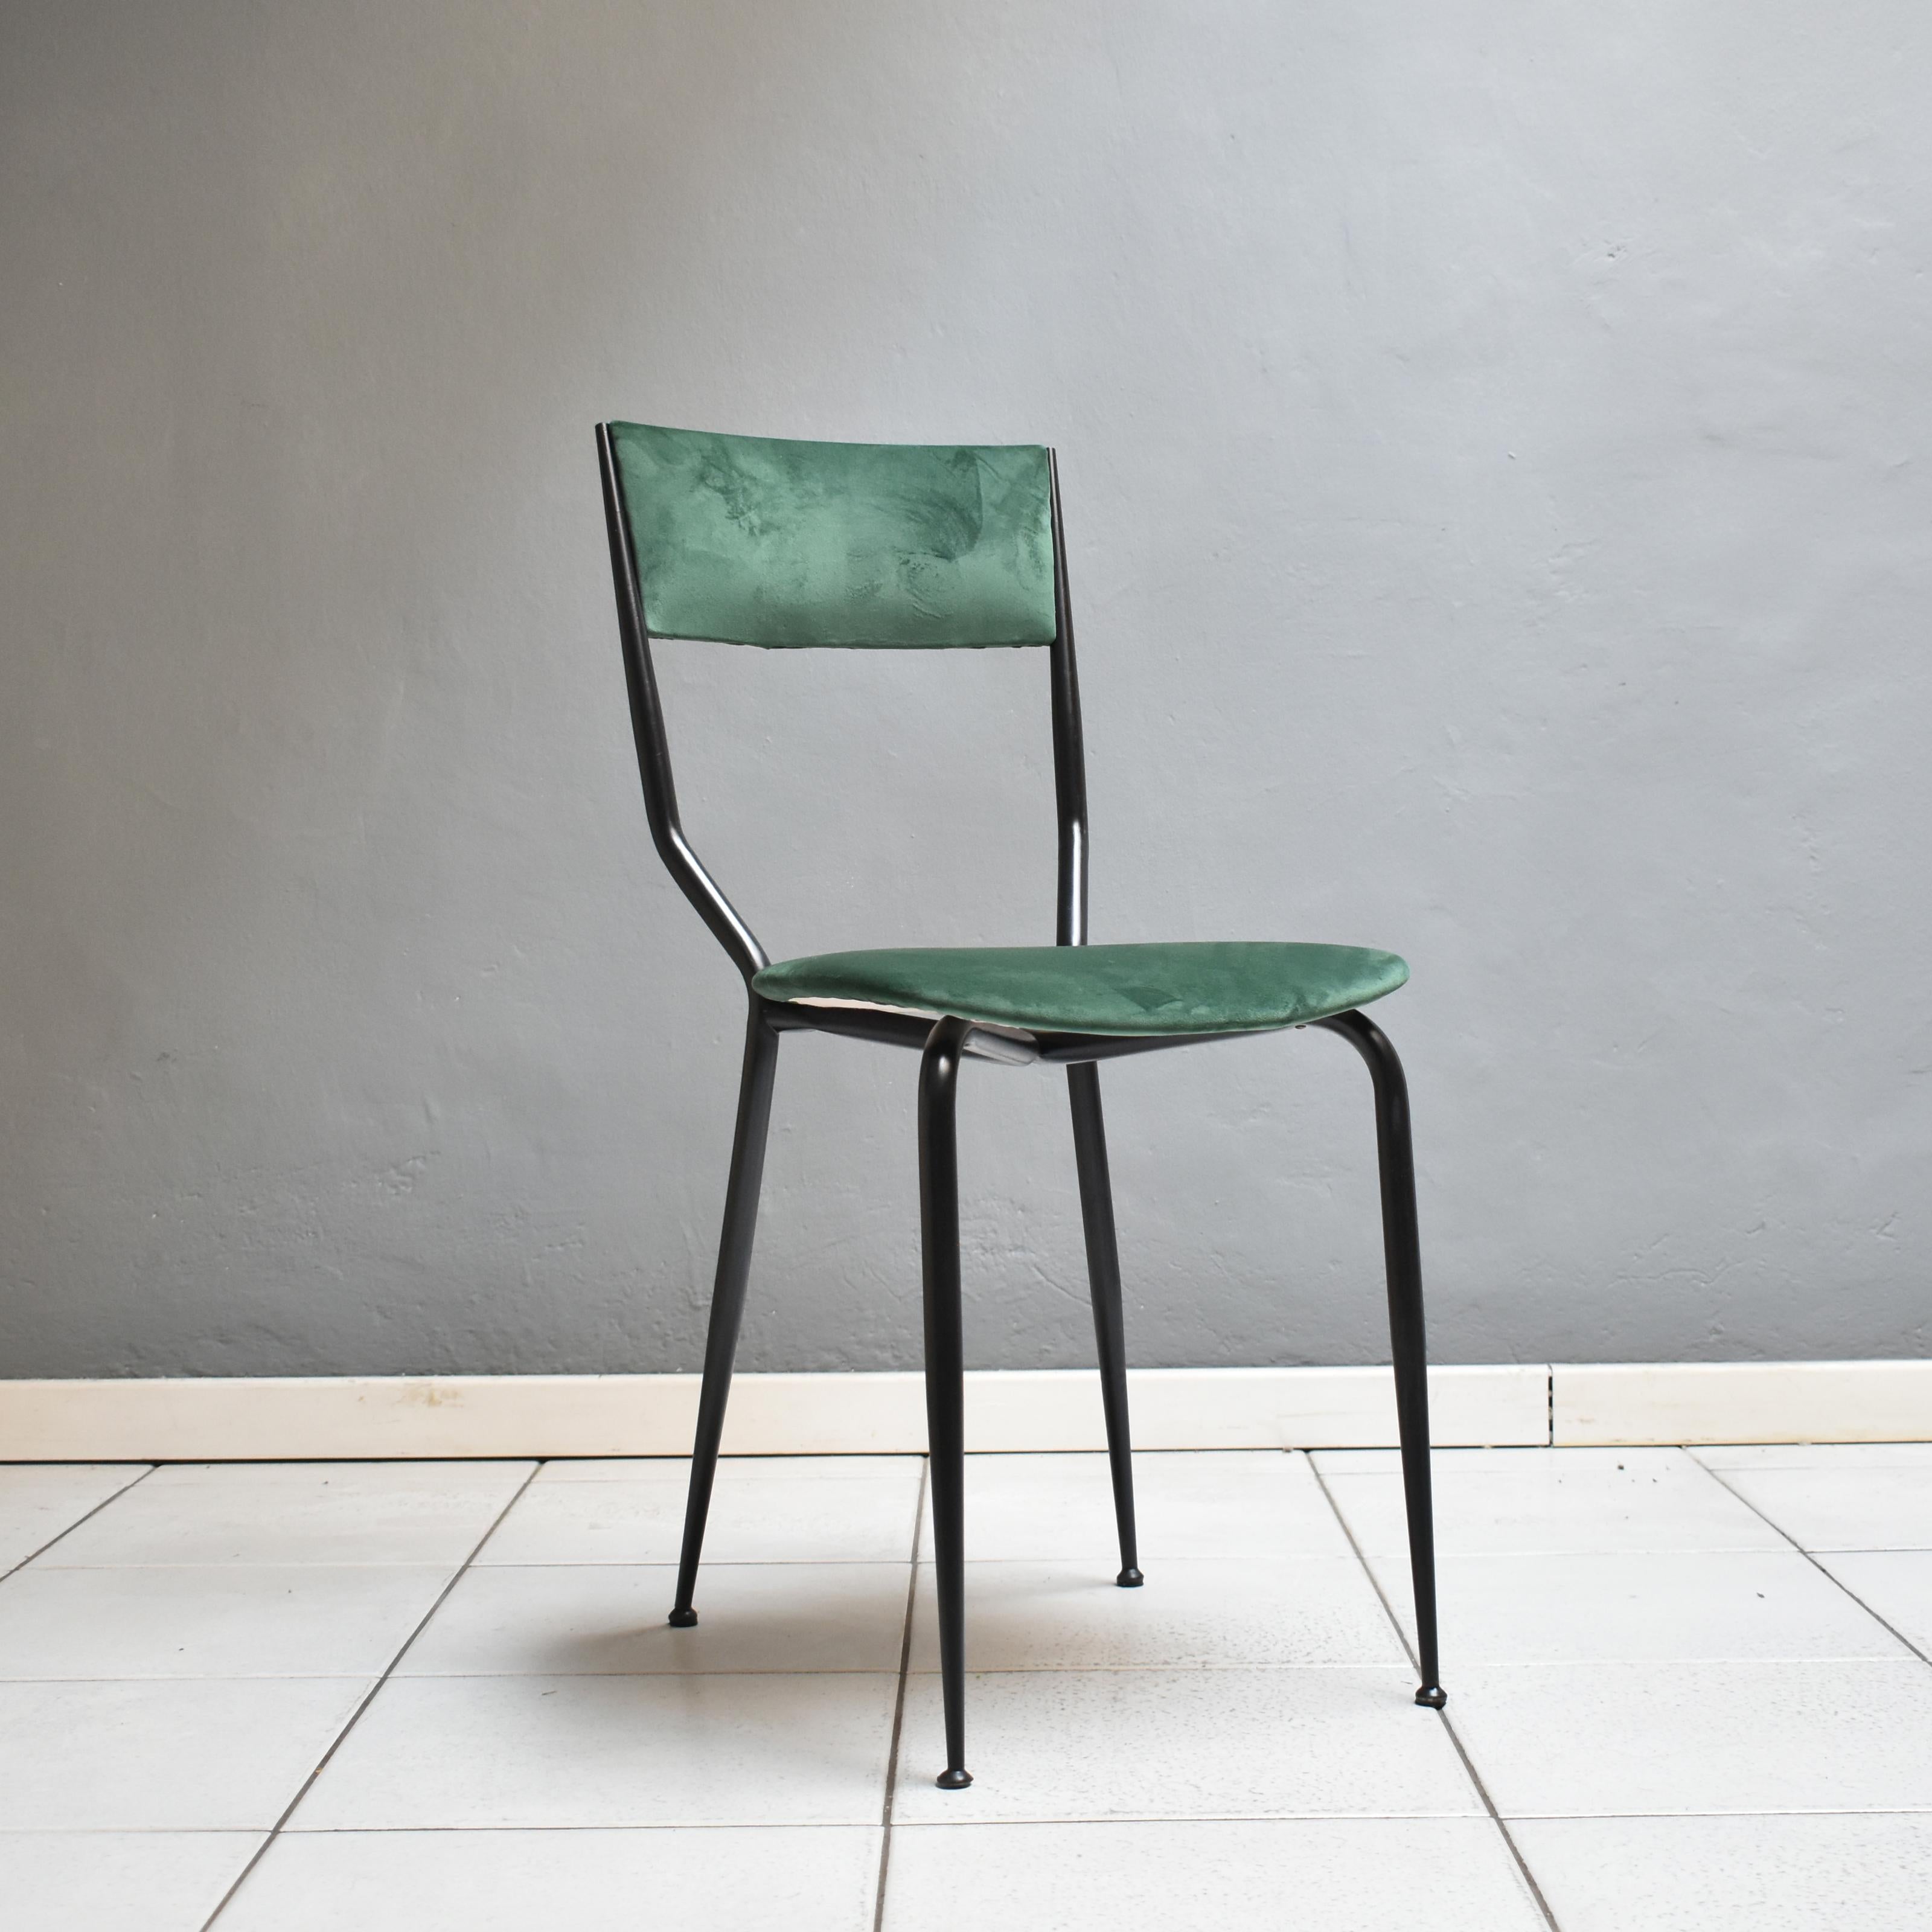 Mid-Century Modern Dining room chair, dating back to the 1960s, Italian manufacture.
The chair have a black iron frame with forest green velvet upholstery.
New upholstery
Four pieces available, other colors are available.